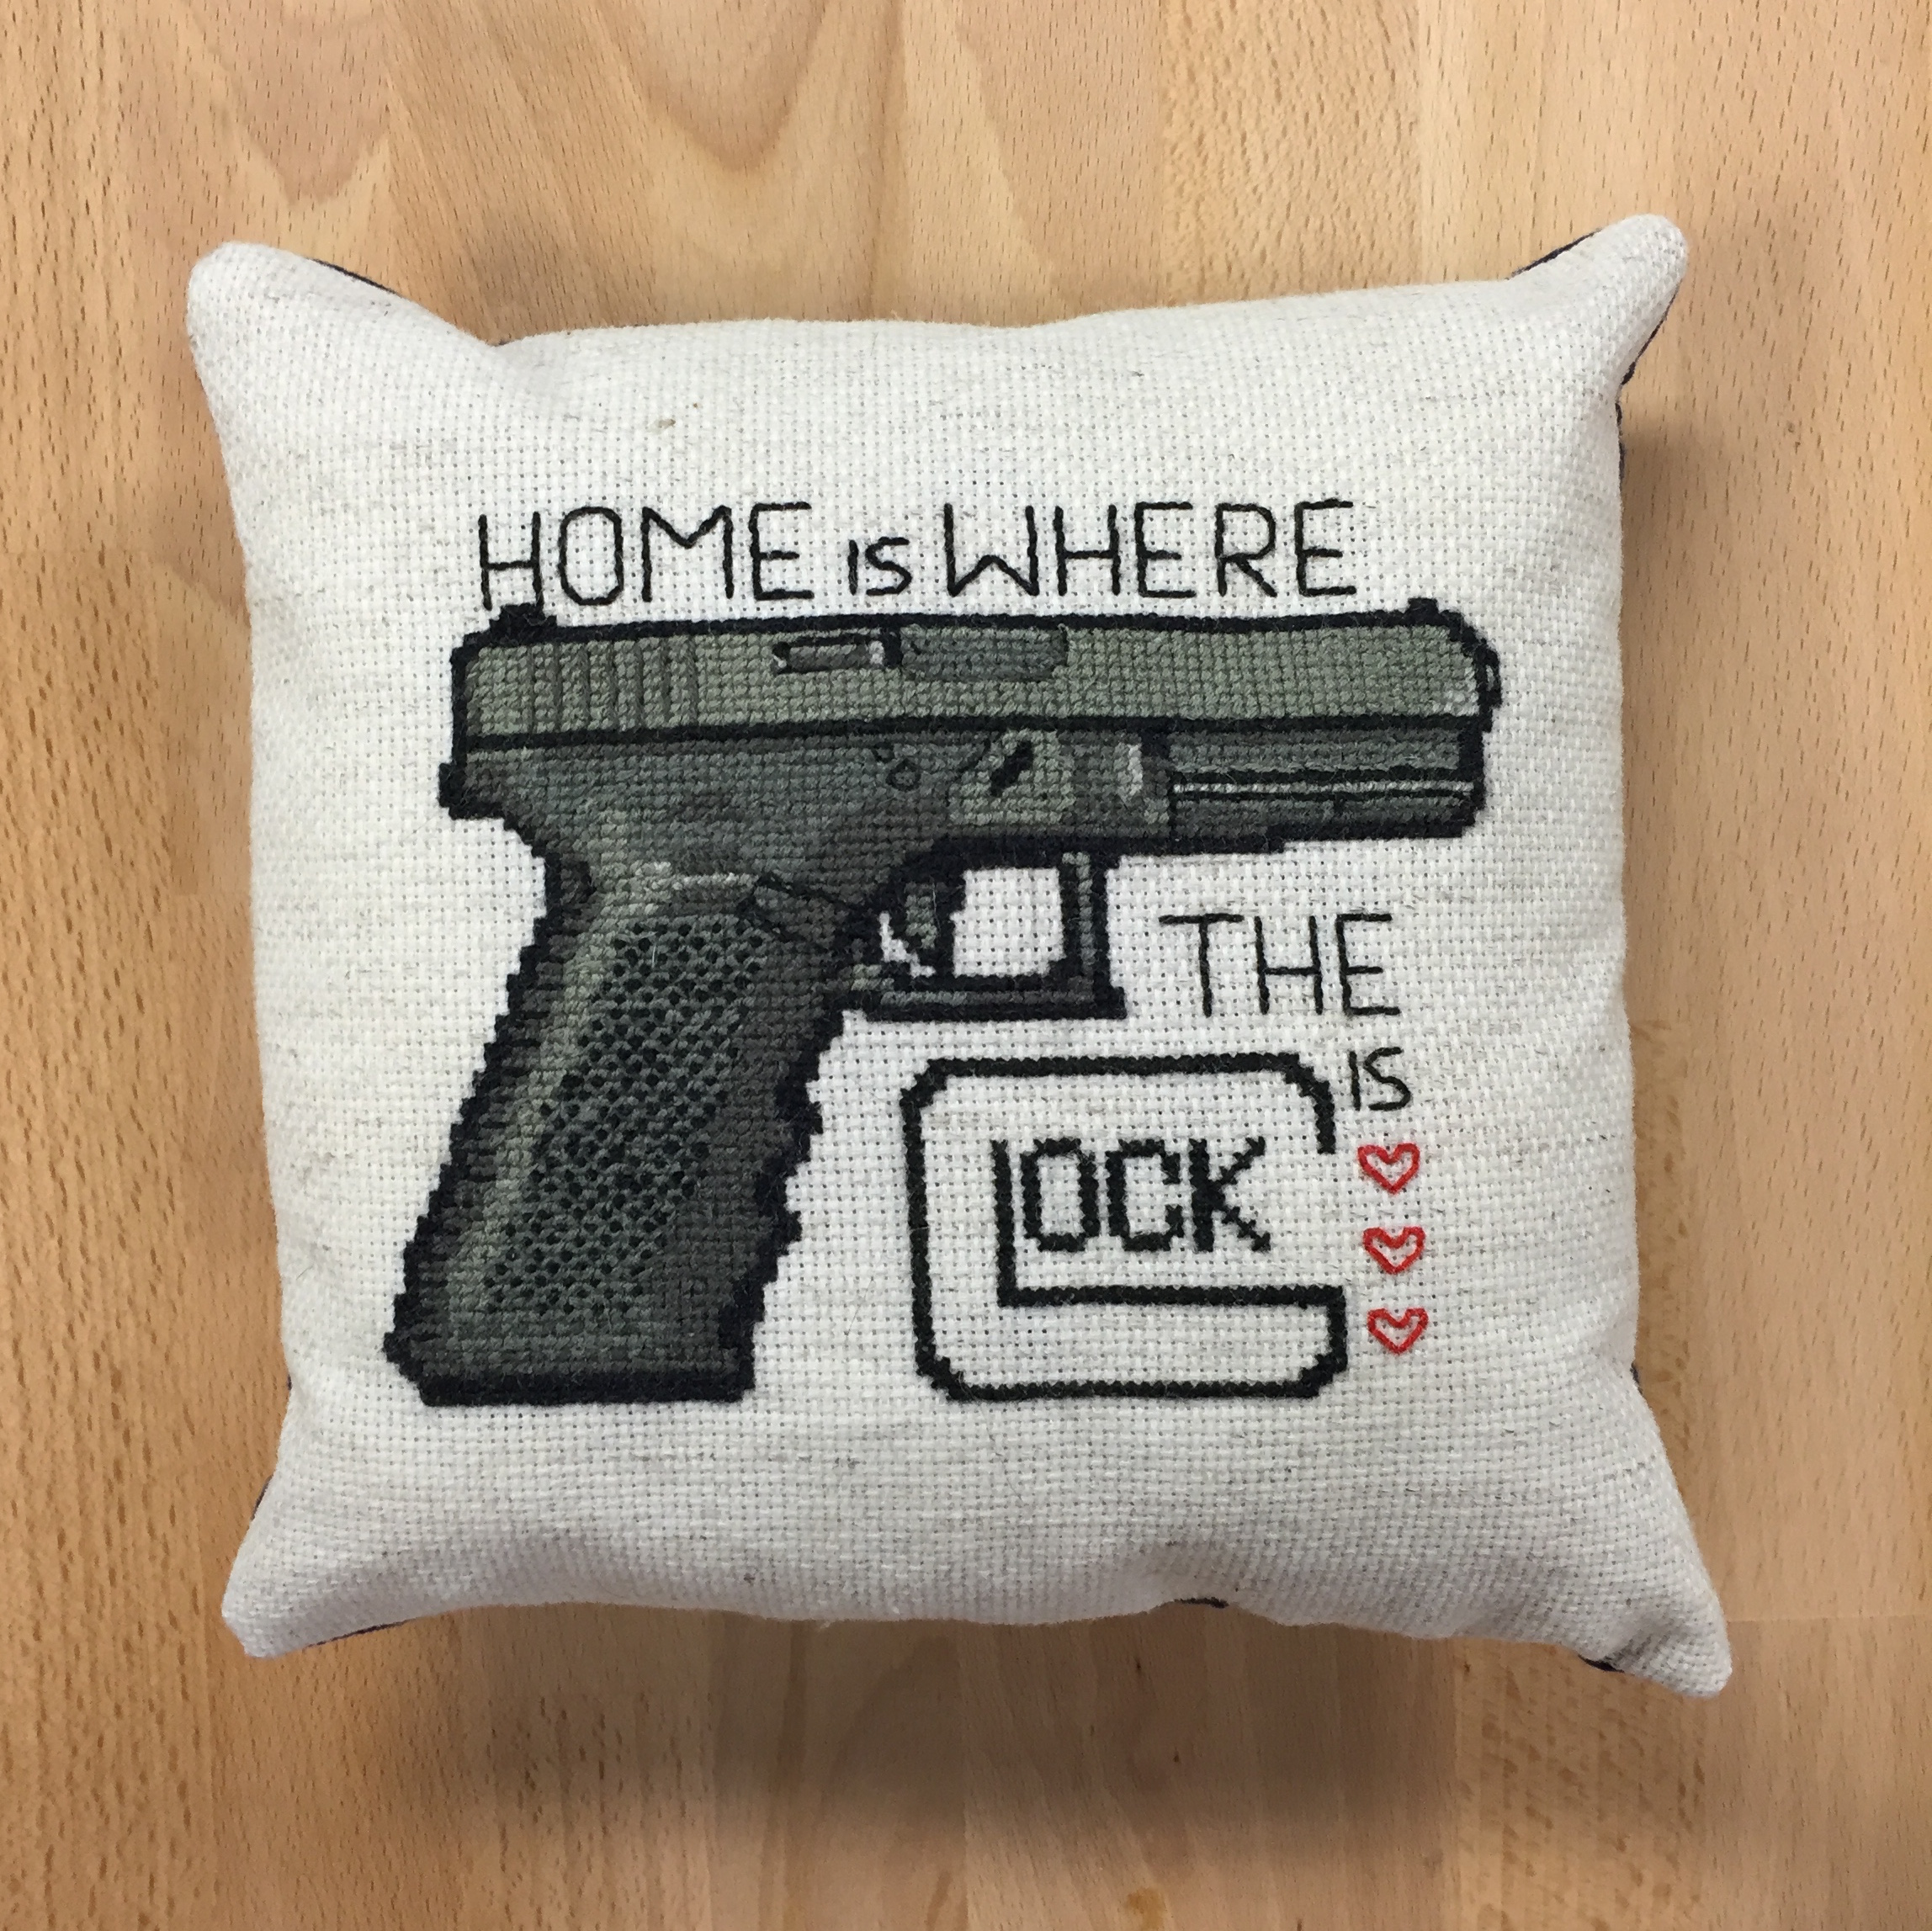 My lady friend made this for me, thought you guys would like it : Glocks